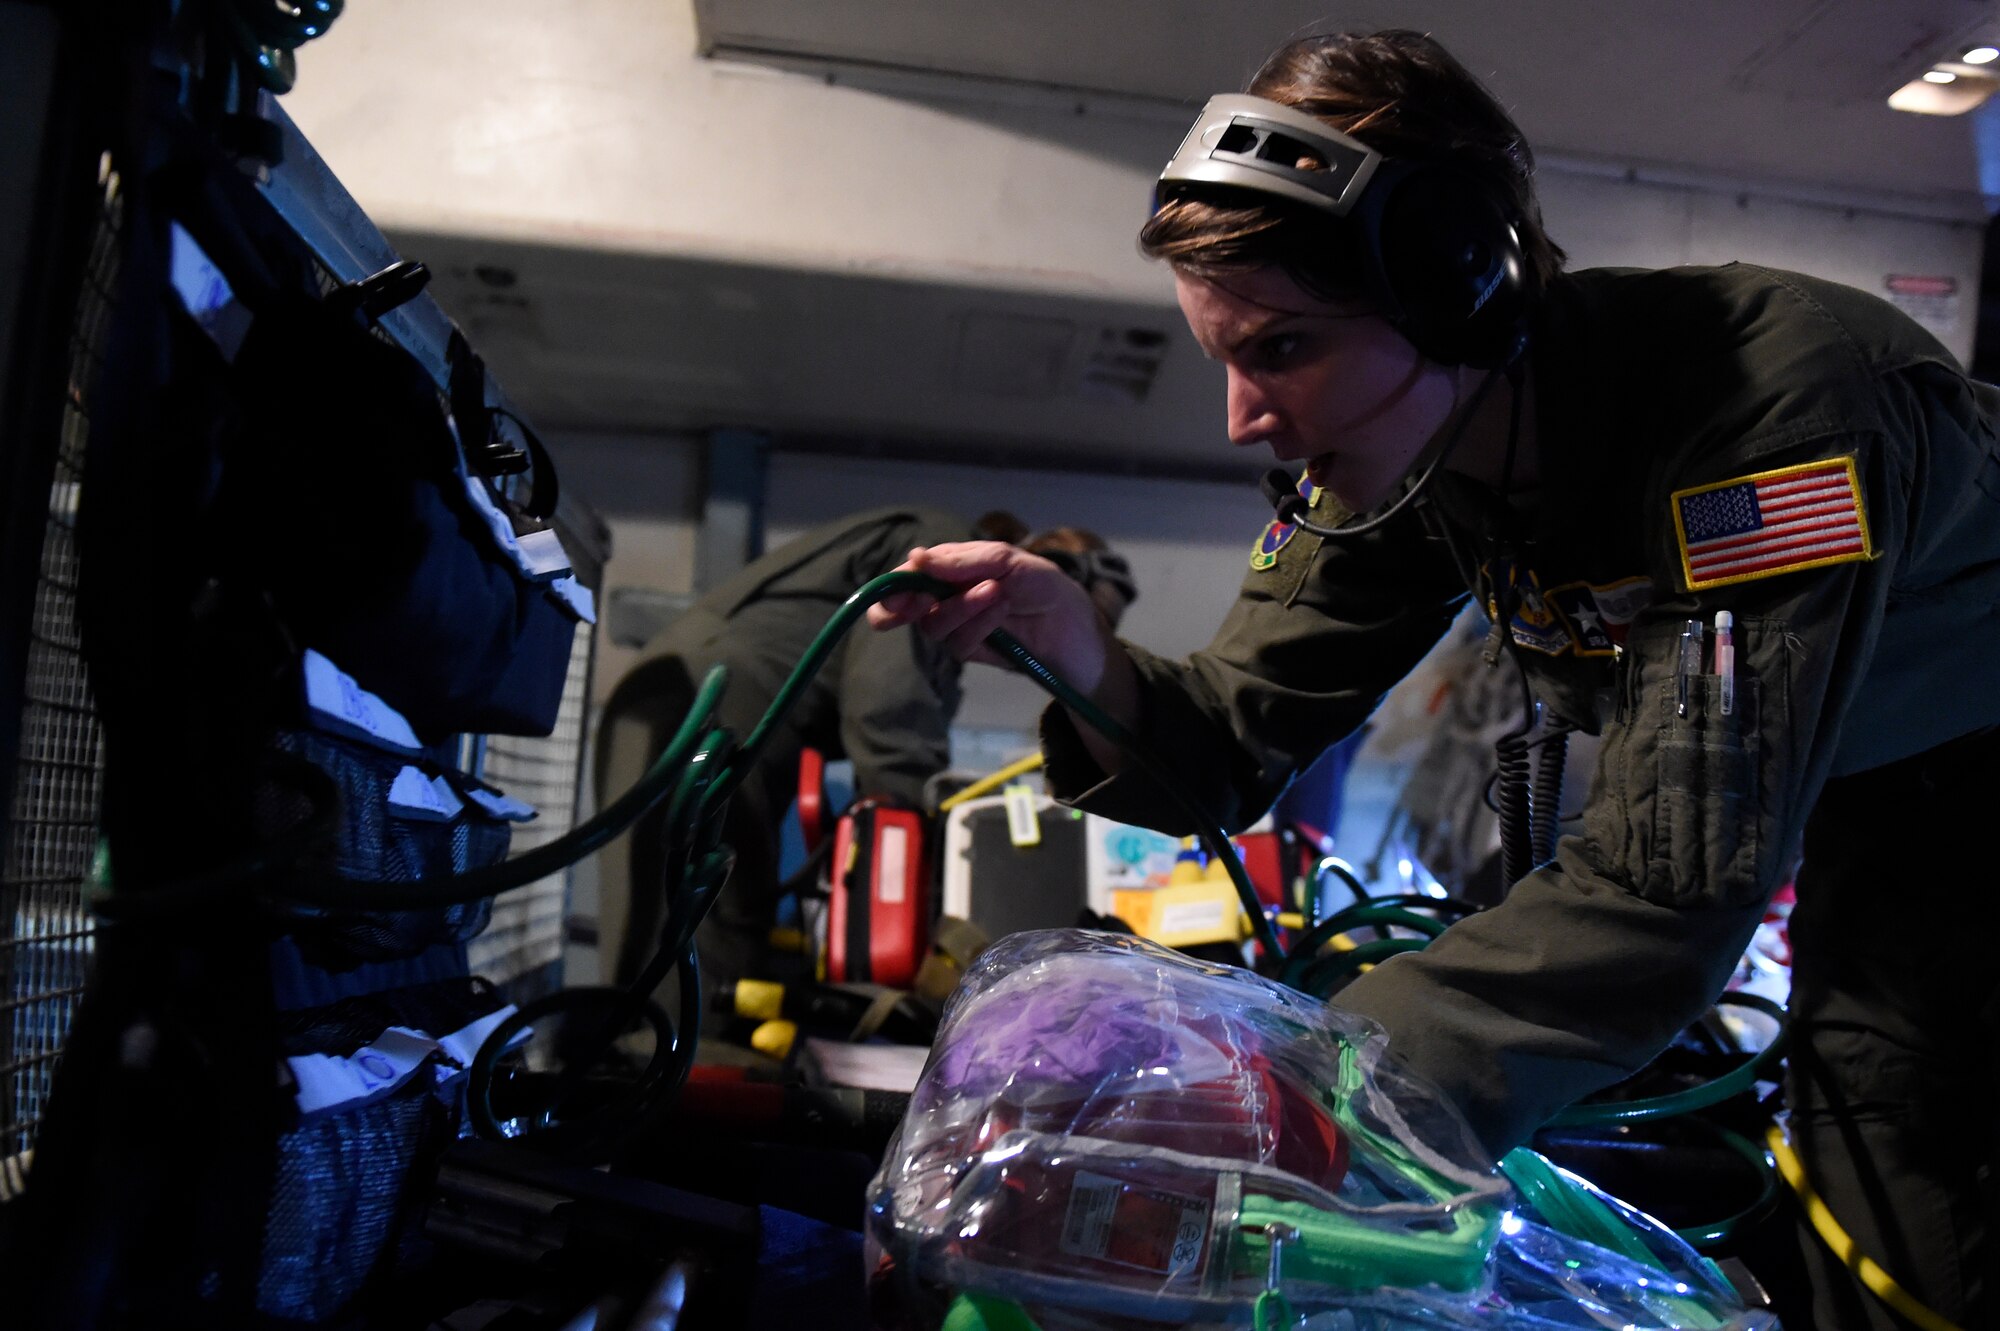 Senior Airman Sarah Clark, 433rd Aeromedical Evacuation Squadron medical technician, prepares medical equipment to aid patients during a training scenario aboard a C-5A Galaxy aircraft Oct. 7, 2015 at Joint Base San Antonio-Lackland, Texas. Configuring a C-5 to meet their needs, the 433rd AES members established and met requirements to conduct Aeromedical Readiness Missions while maintaining the focus on the patient, significantly improving the efficiency and effectiveness of safe and responsive patients globally. (U.S. Air Force photo by Senior Airman Keith James/Released)